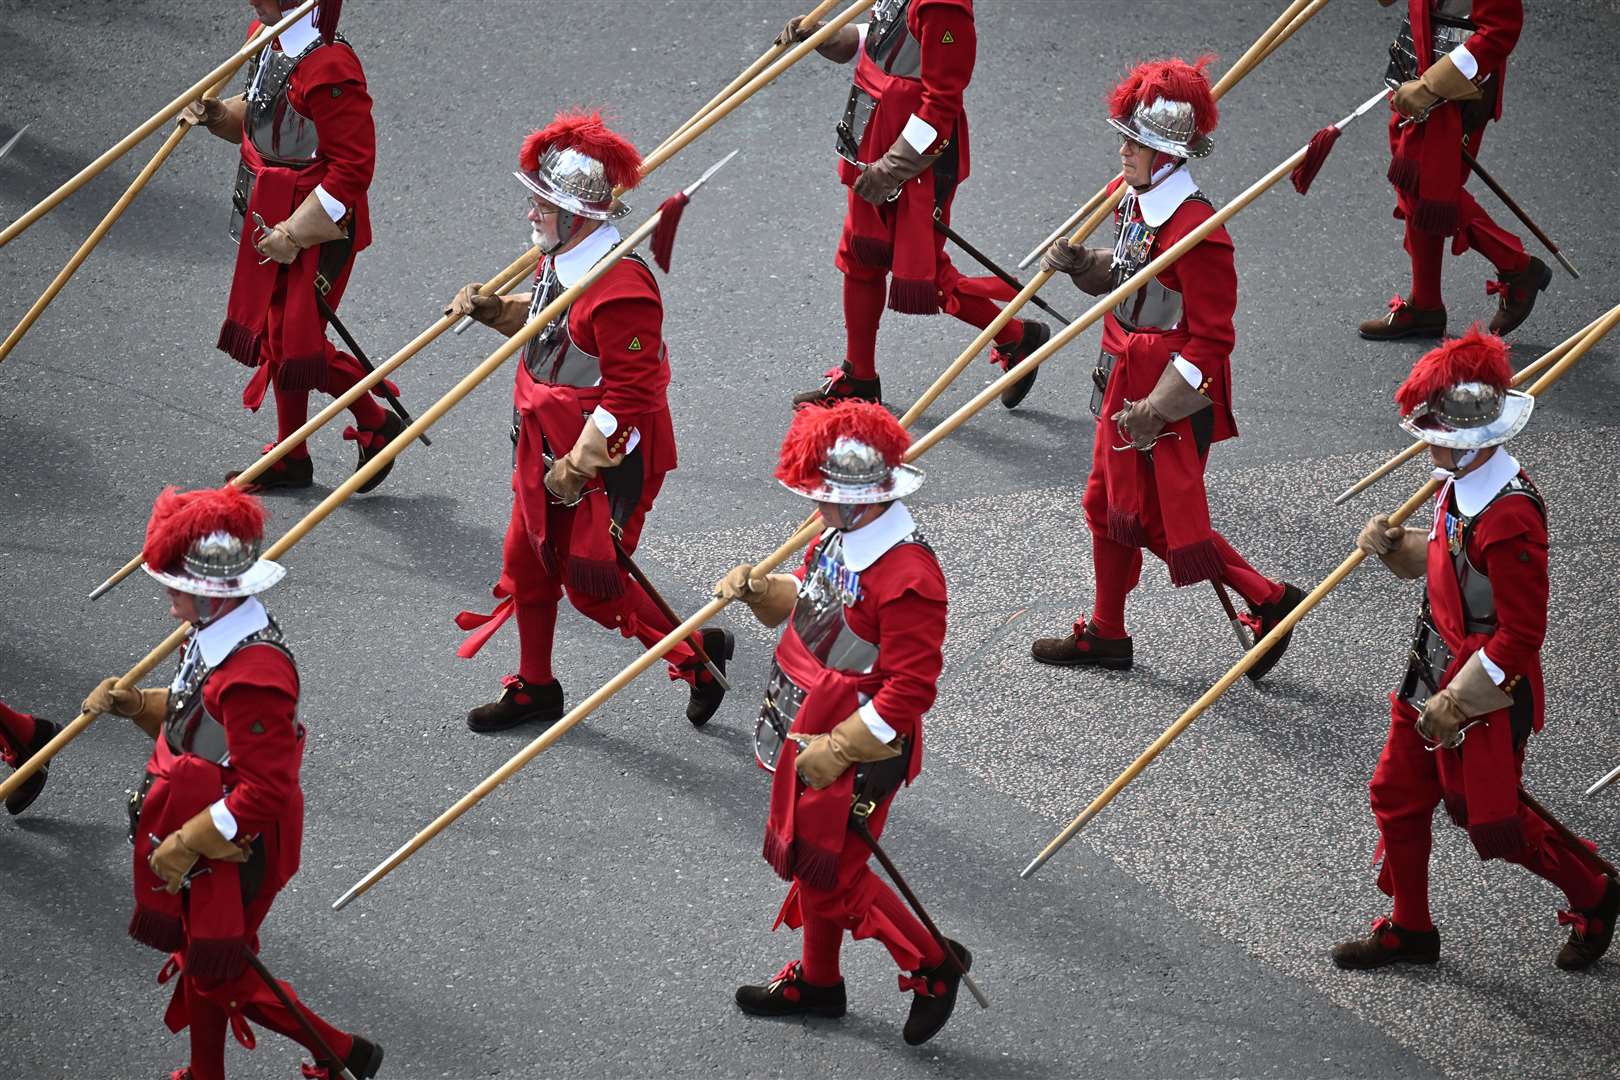 The Company of Pikemen and Musketeers process to the Royal Exchange, prior to the proclamation (Leon Neal/PA)